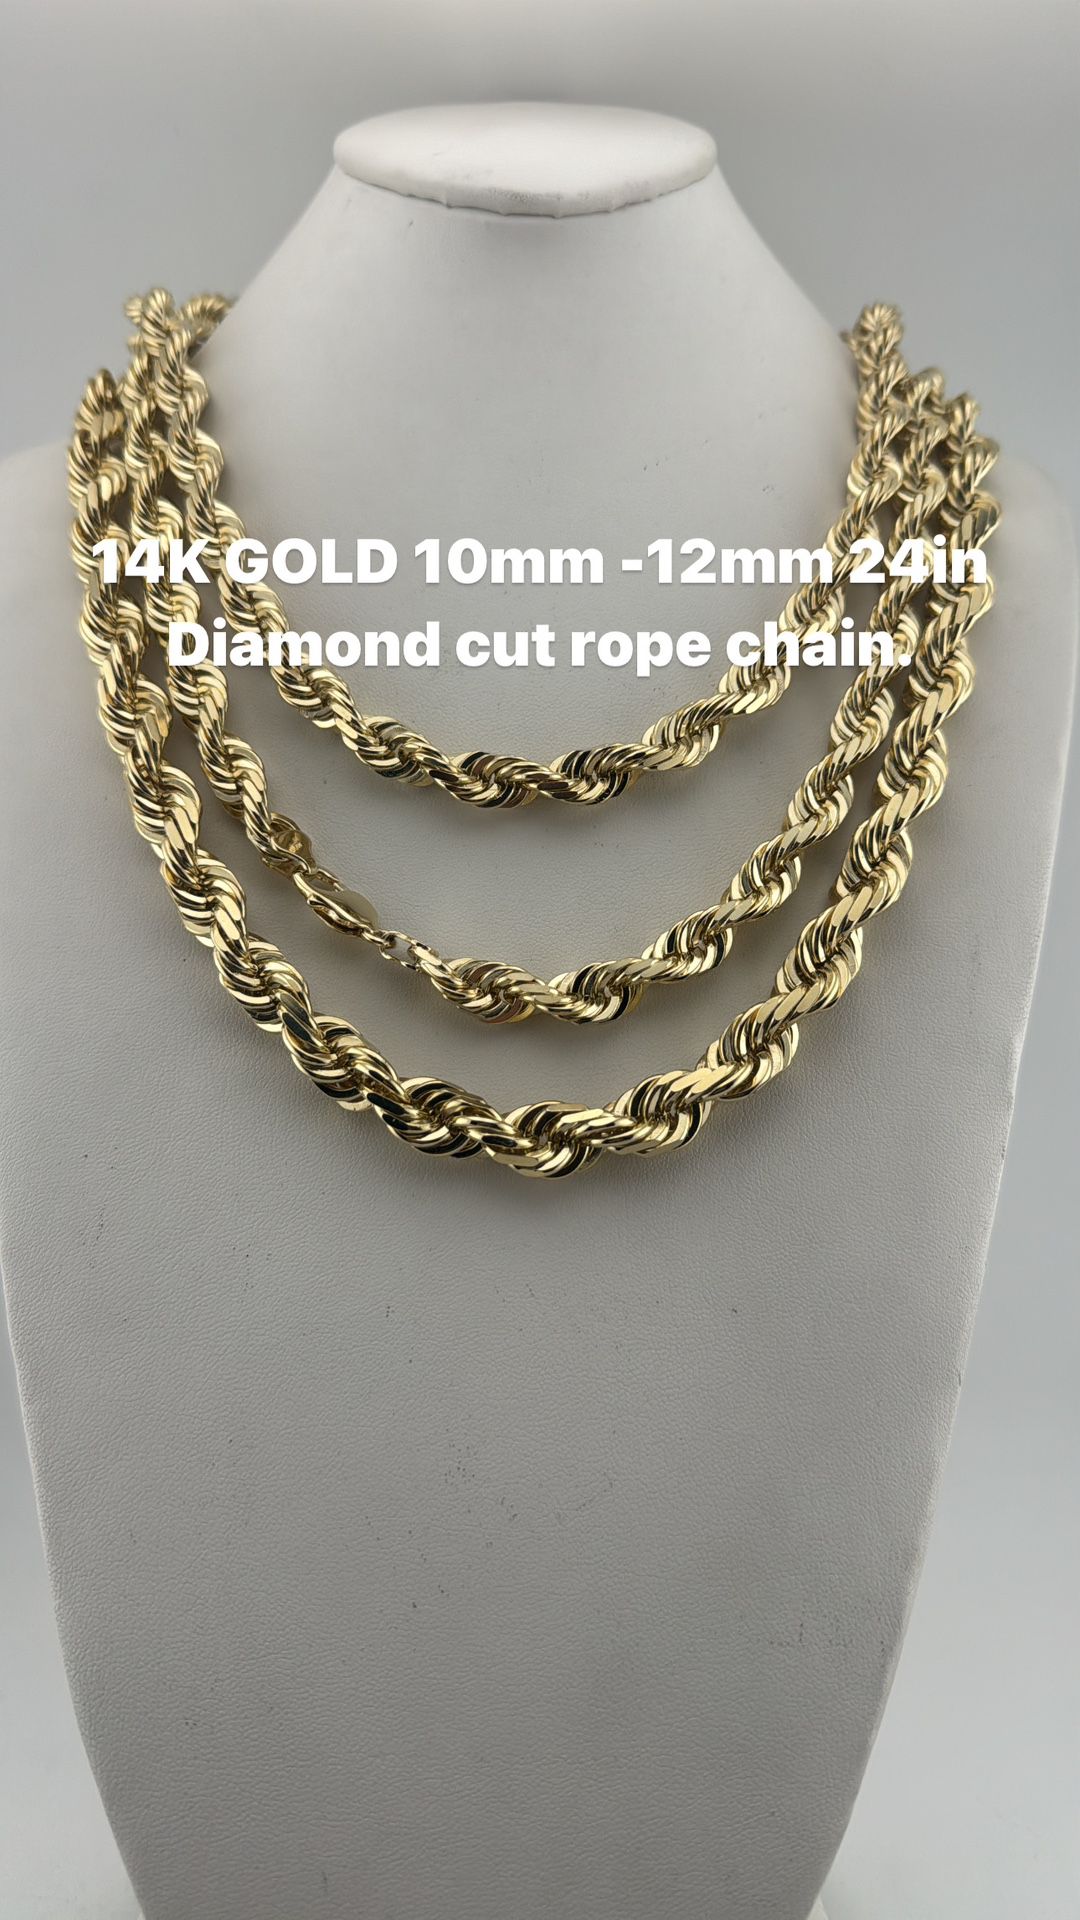 14K Gold diamond cut rope  chain. 10mm -12mm 24in re stock.